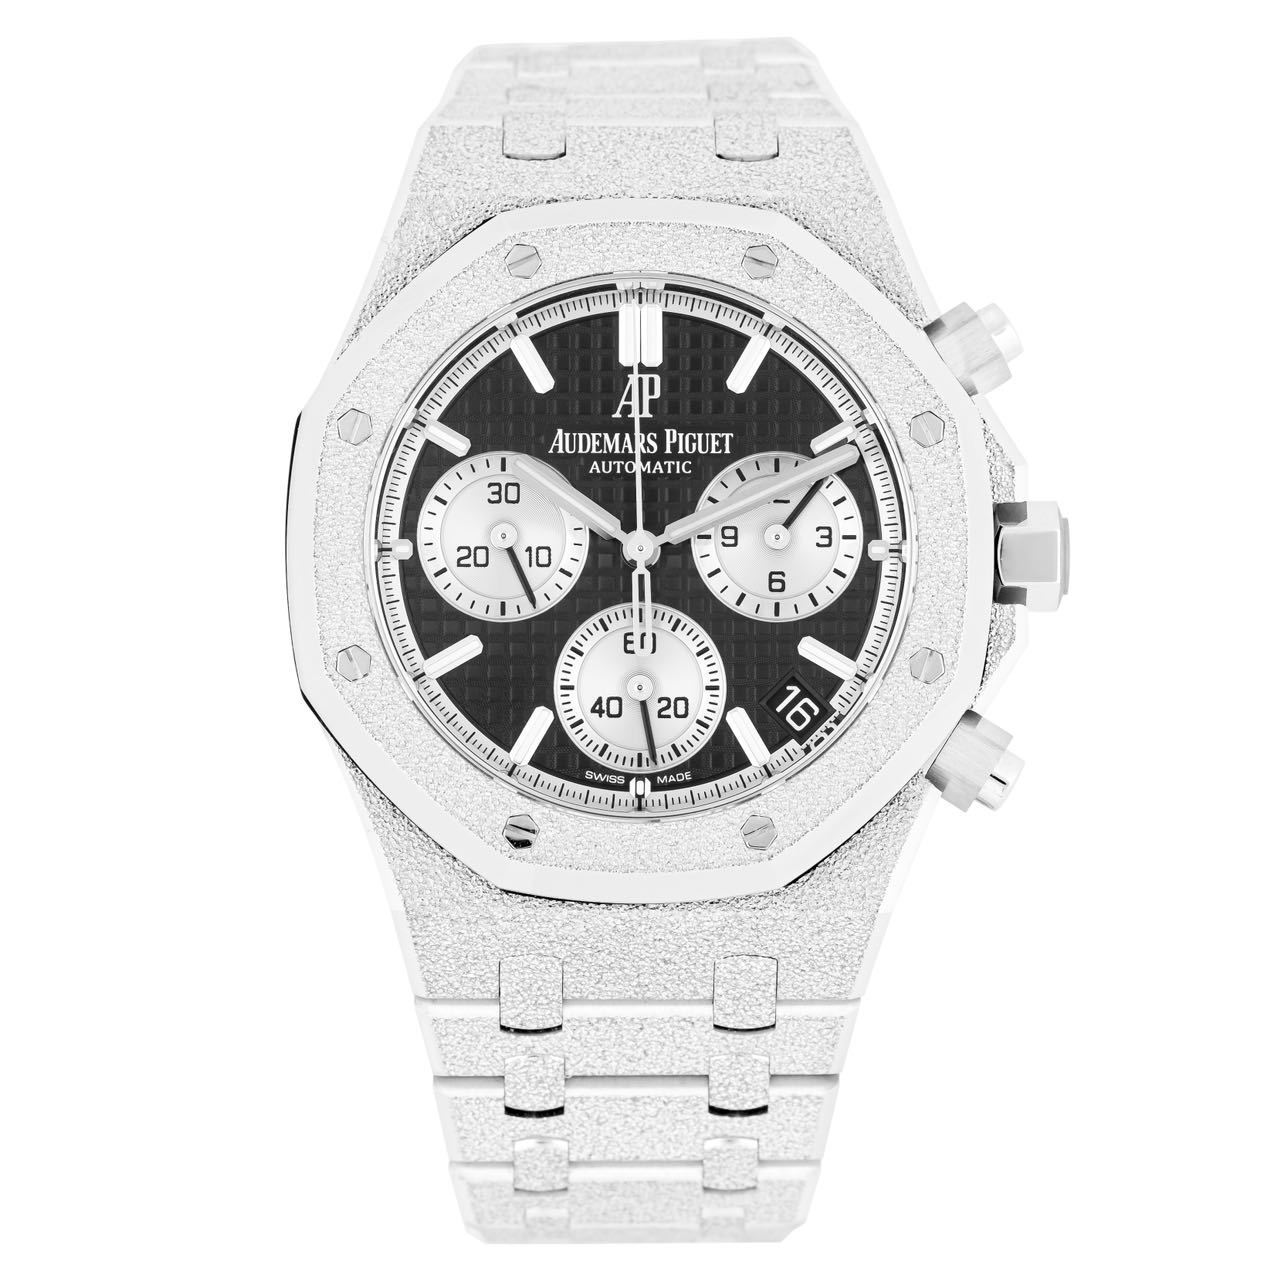 New Audermars Piguet Royal Oak Chronograph - Fully Frosted